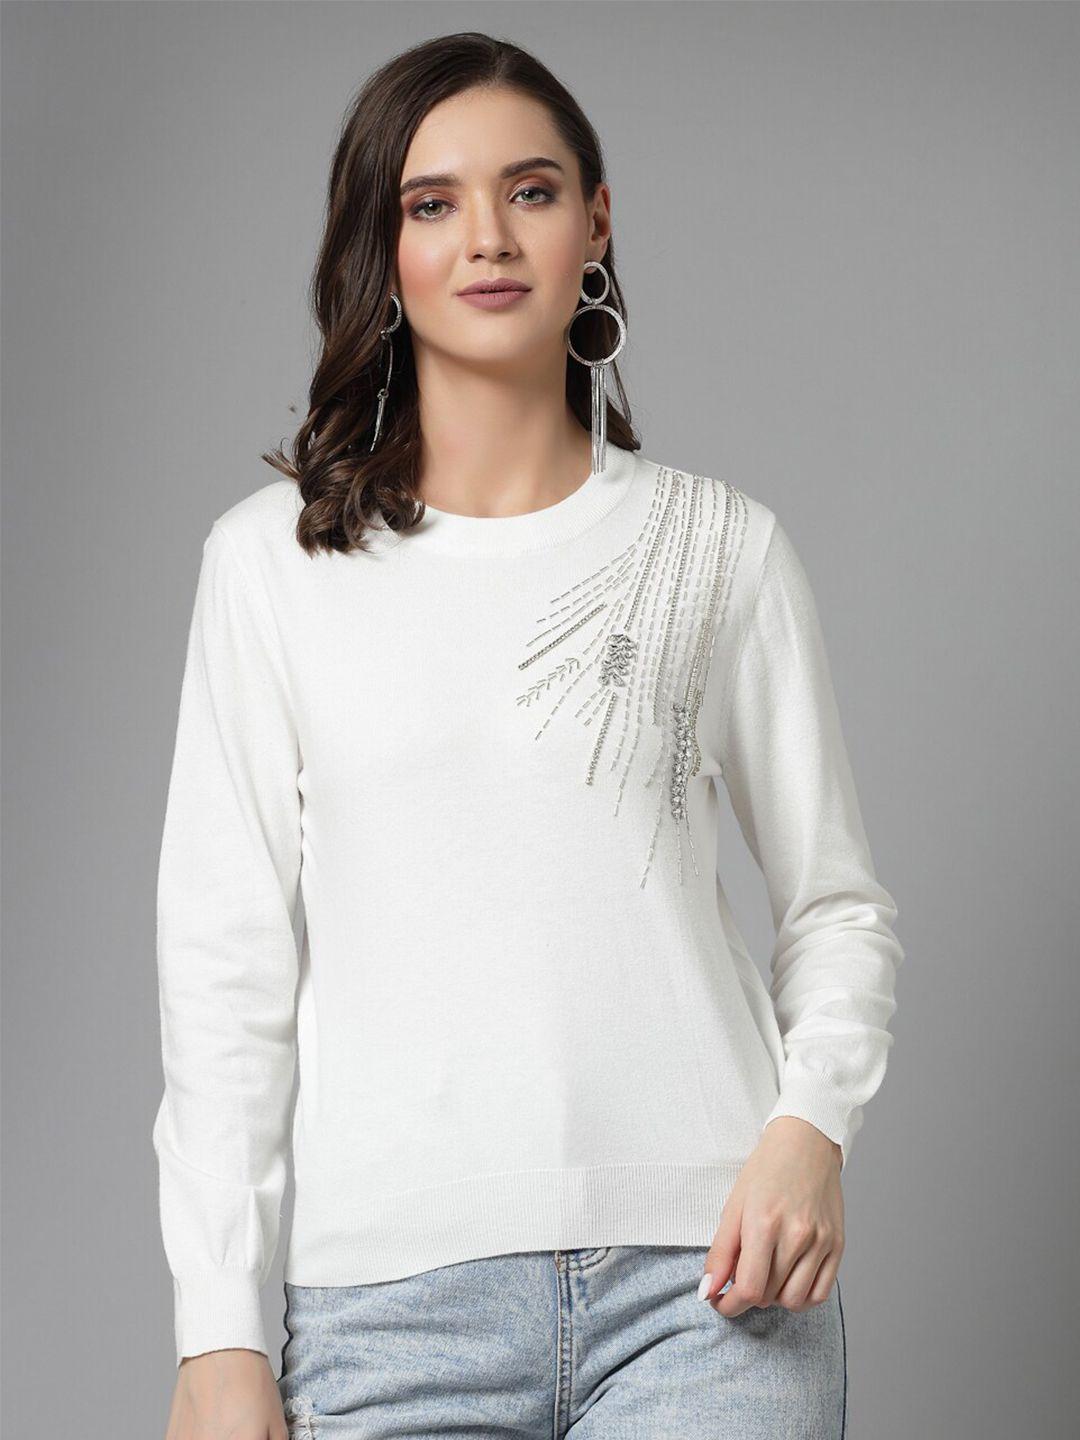 mafadeny winter wear stylished & cosy embellished pullover top